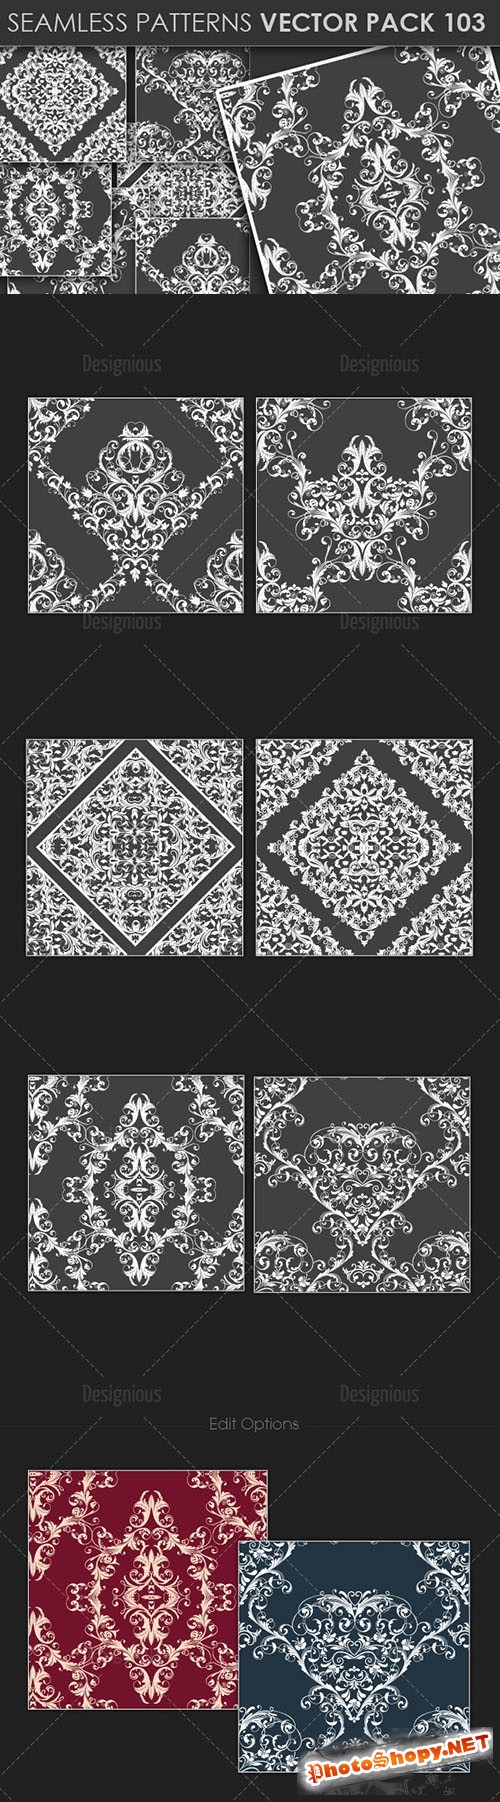 Seamless Patterns Vector Pack 103